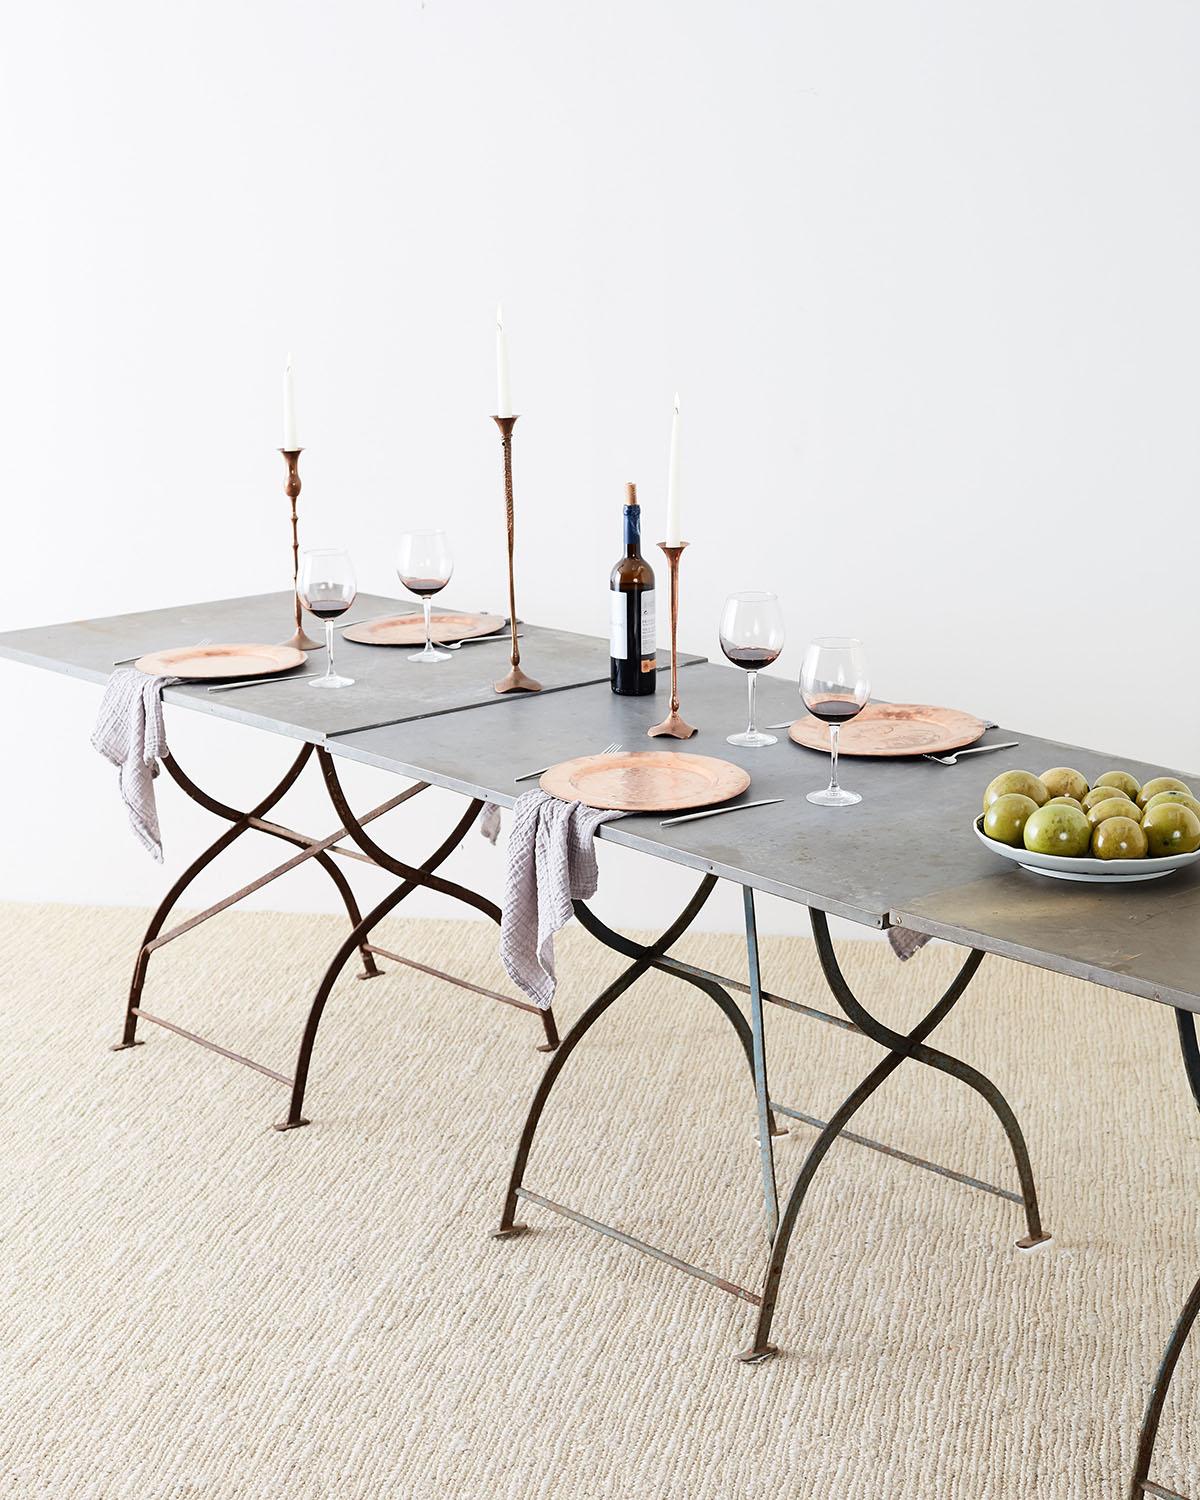 Rare set of three French zinc top garden tables featuring a bistro style folding iron base. These dining tables have beautifully aged soft zinc tops supported by an x base with campaign style folding legs. These dining tables work great on soft